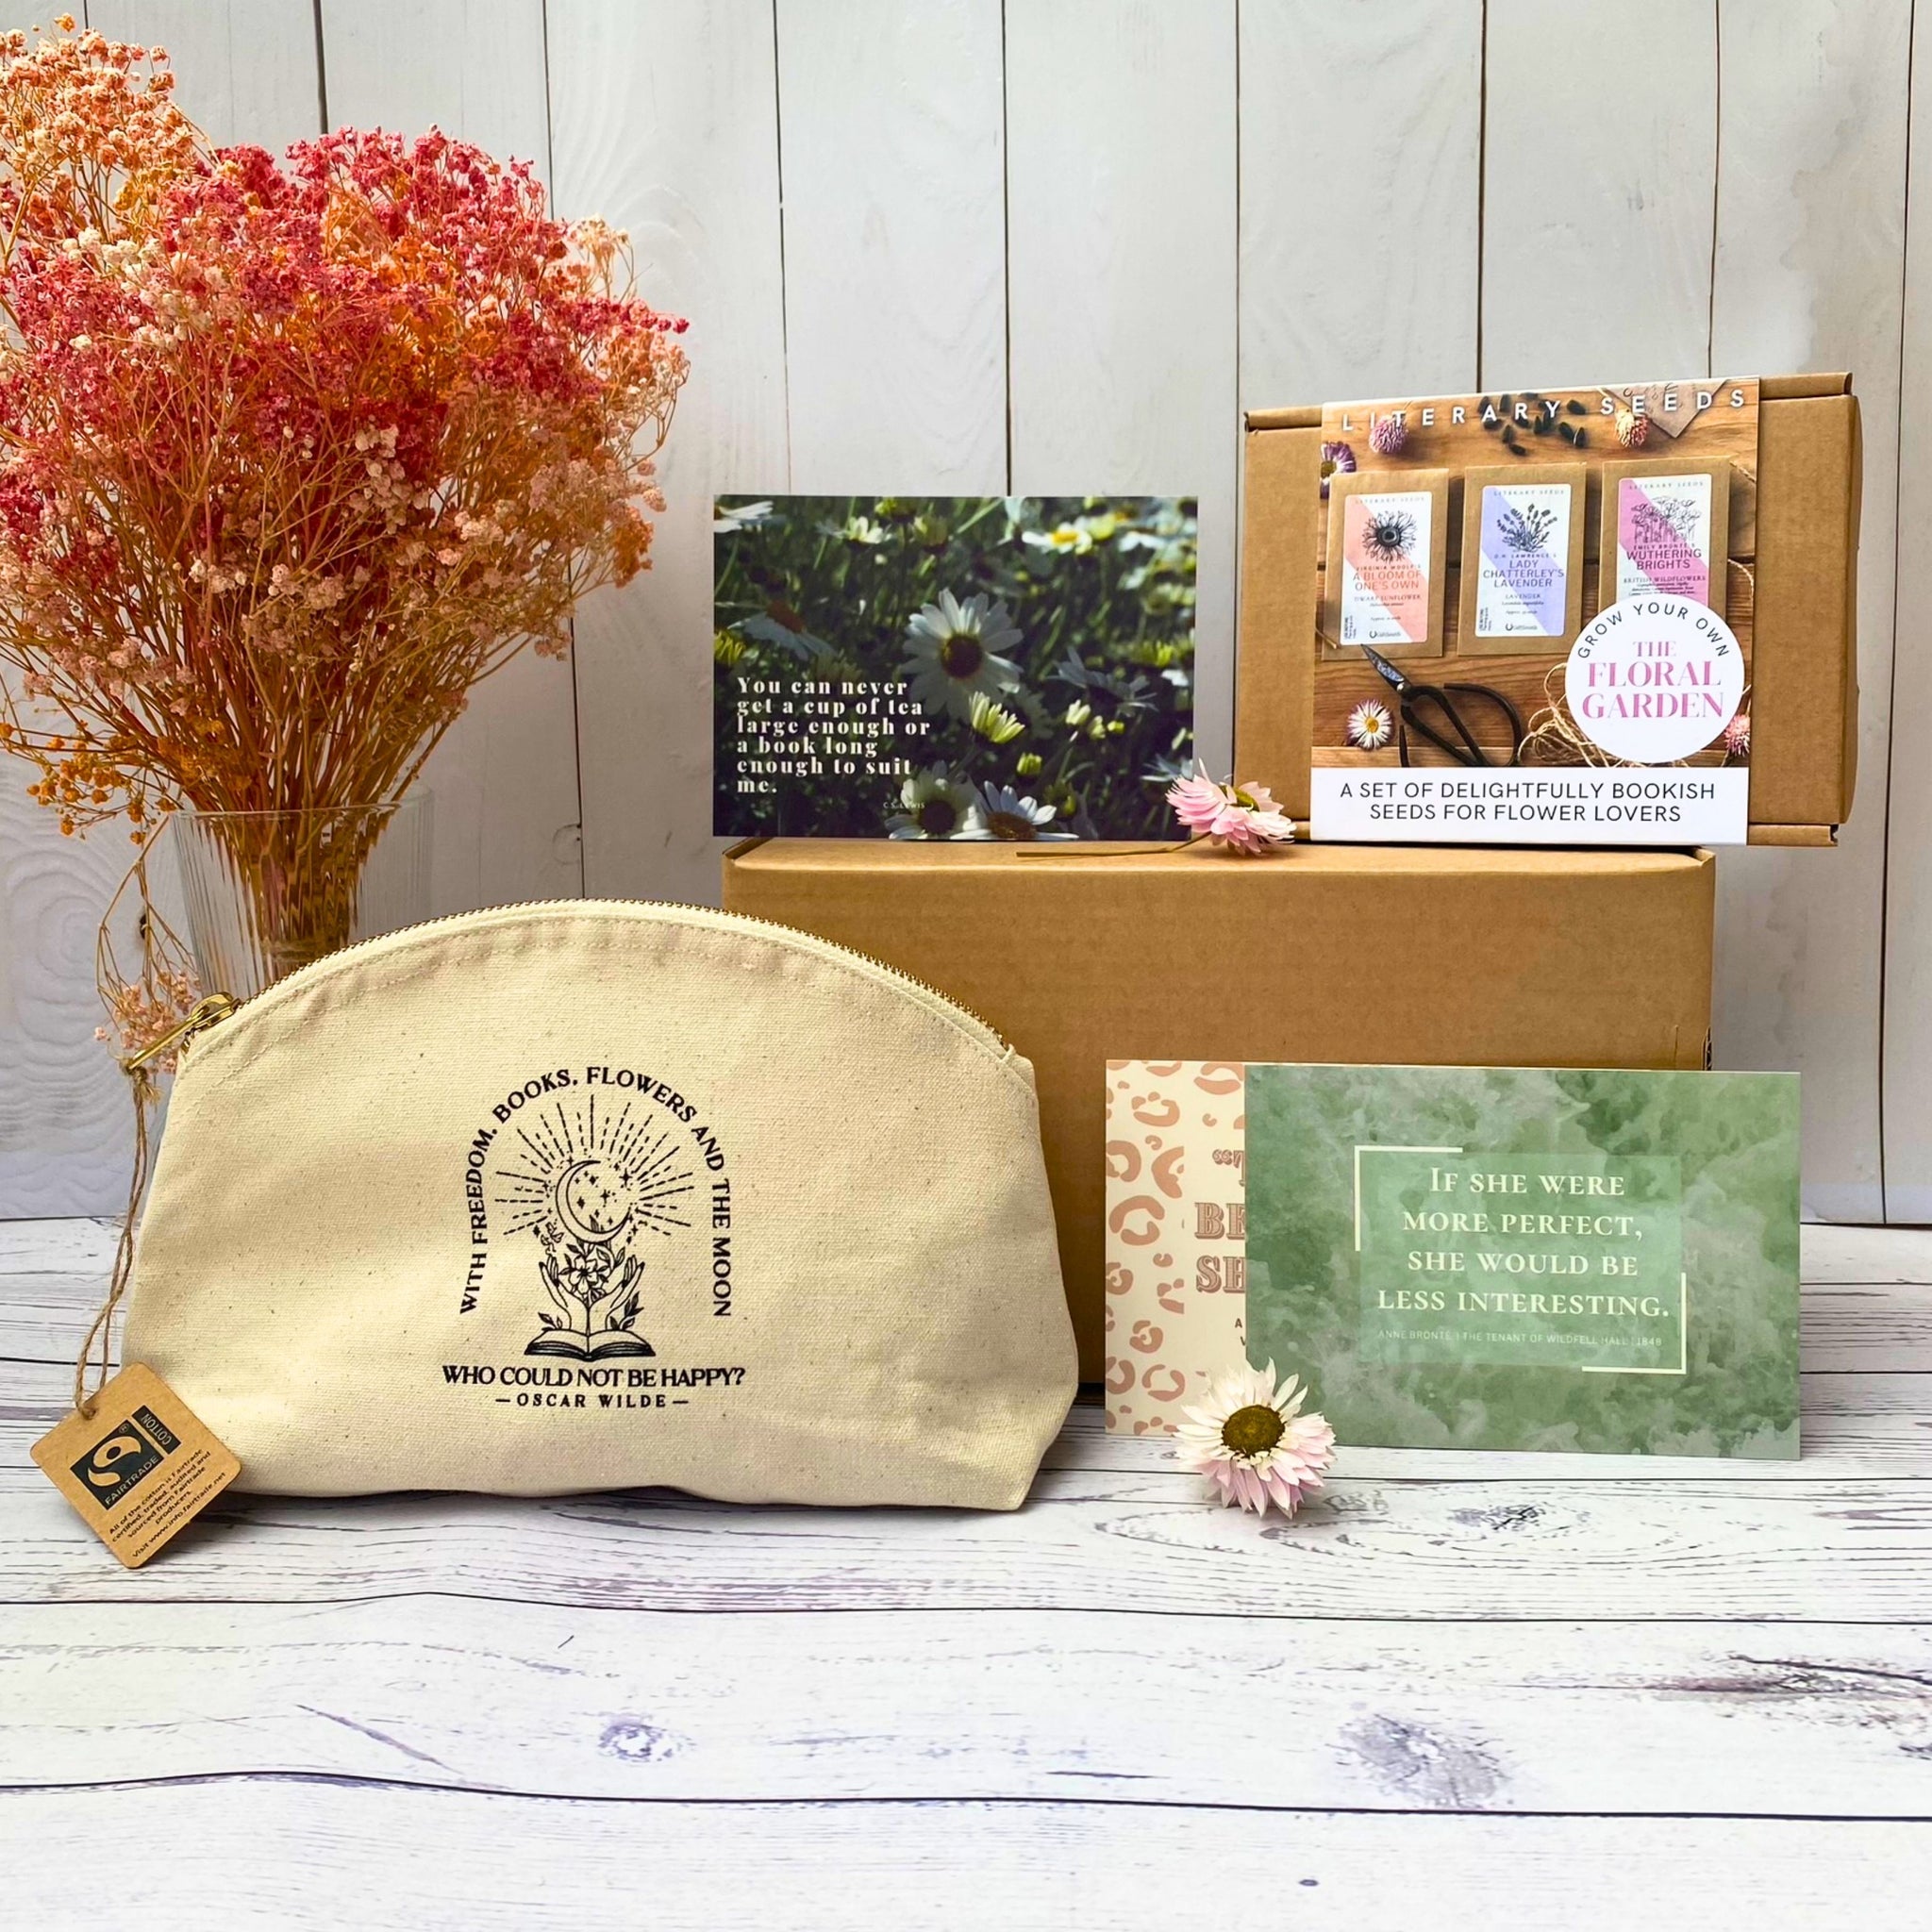 The Bookish Flower Lover's Dreamy Gift Box